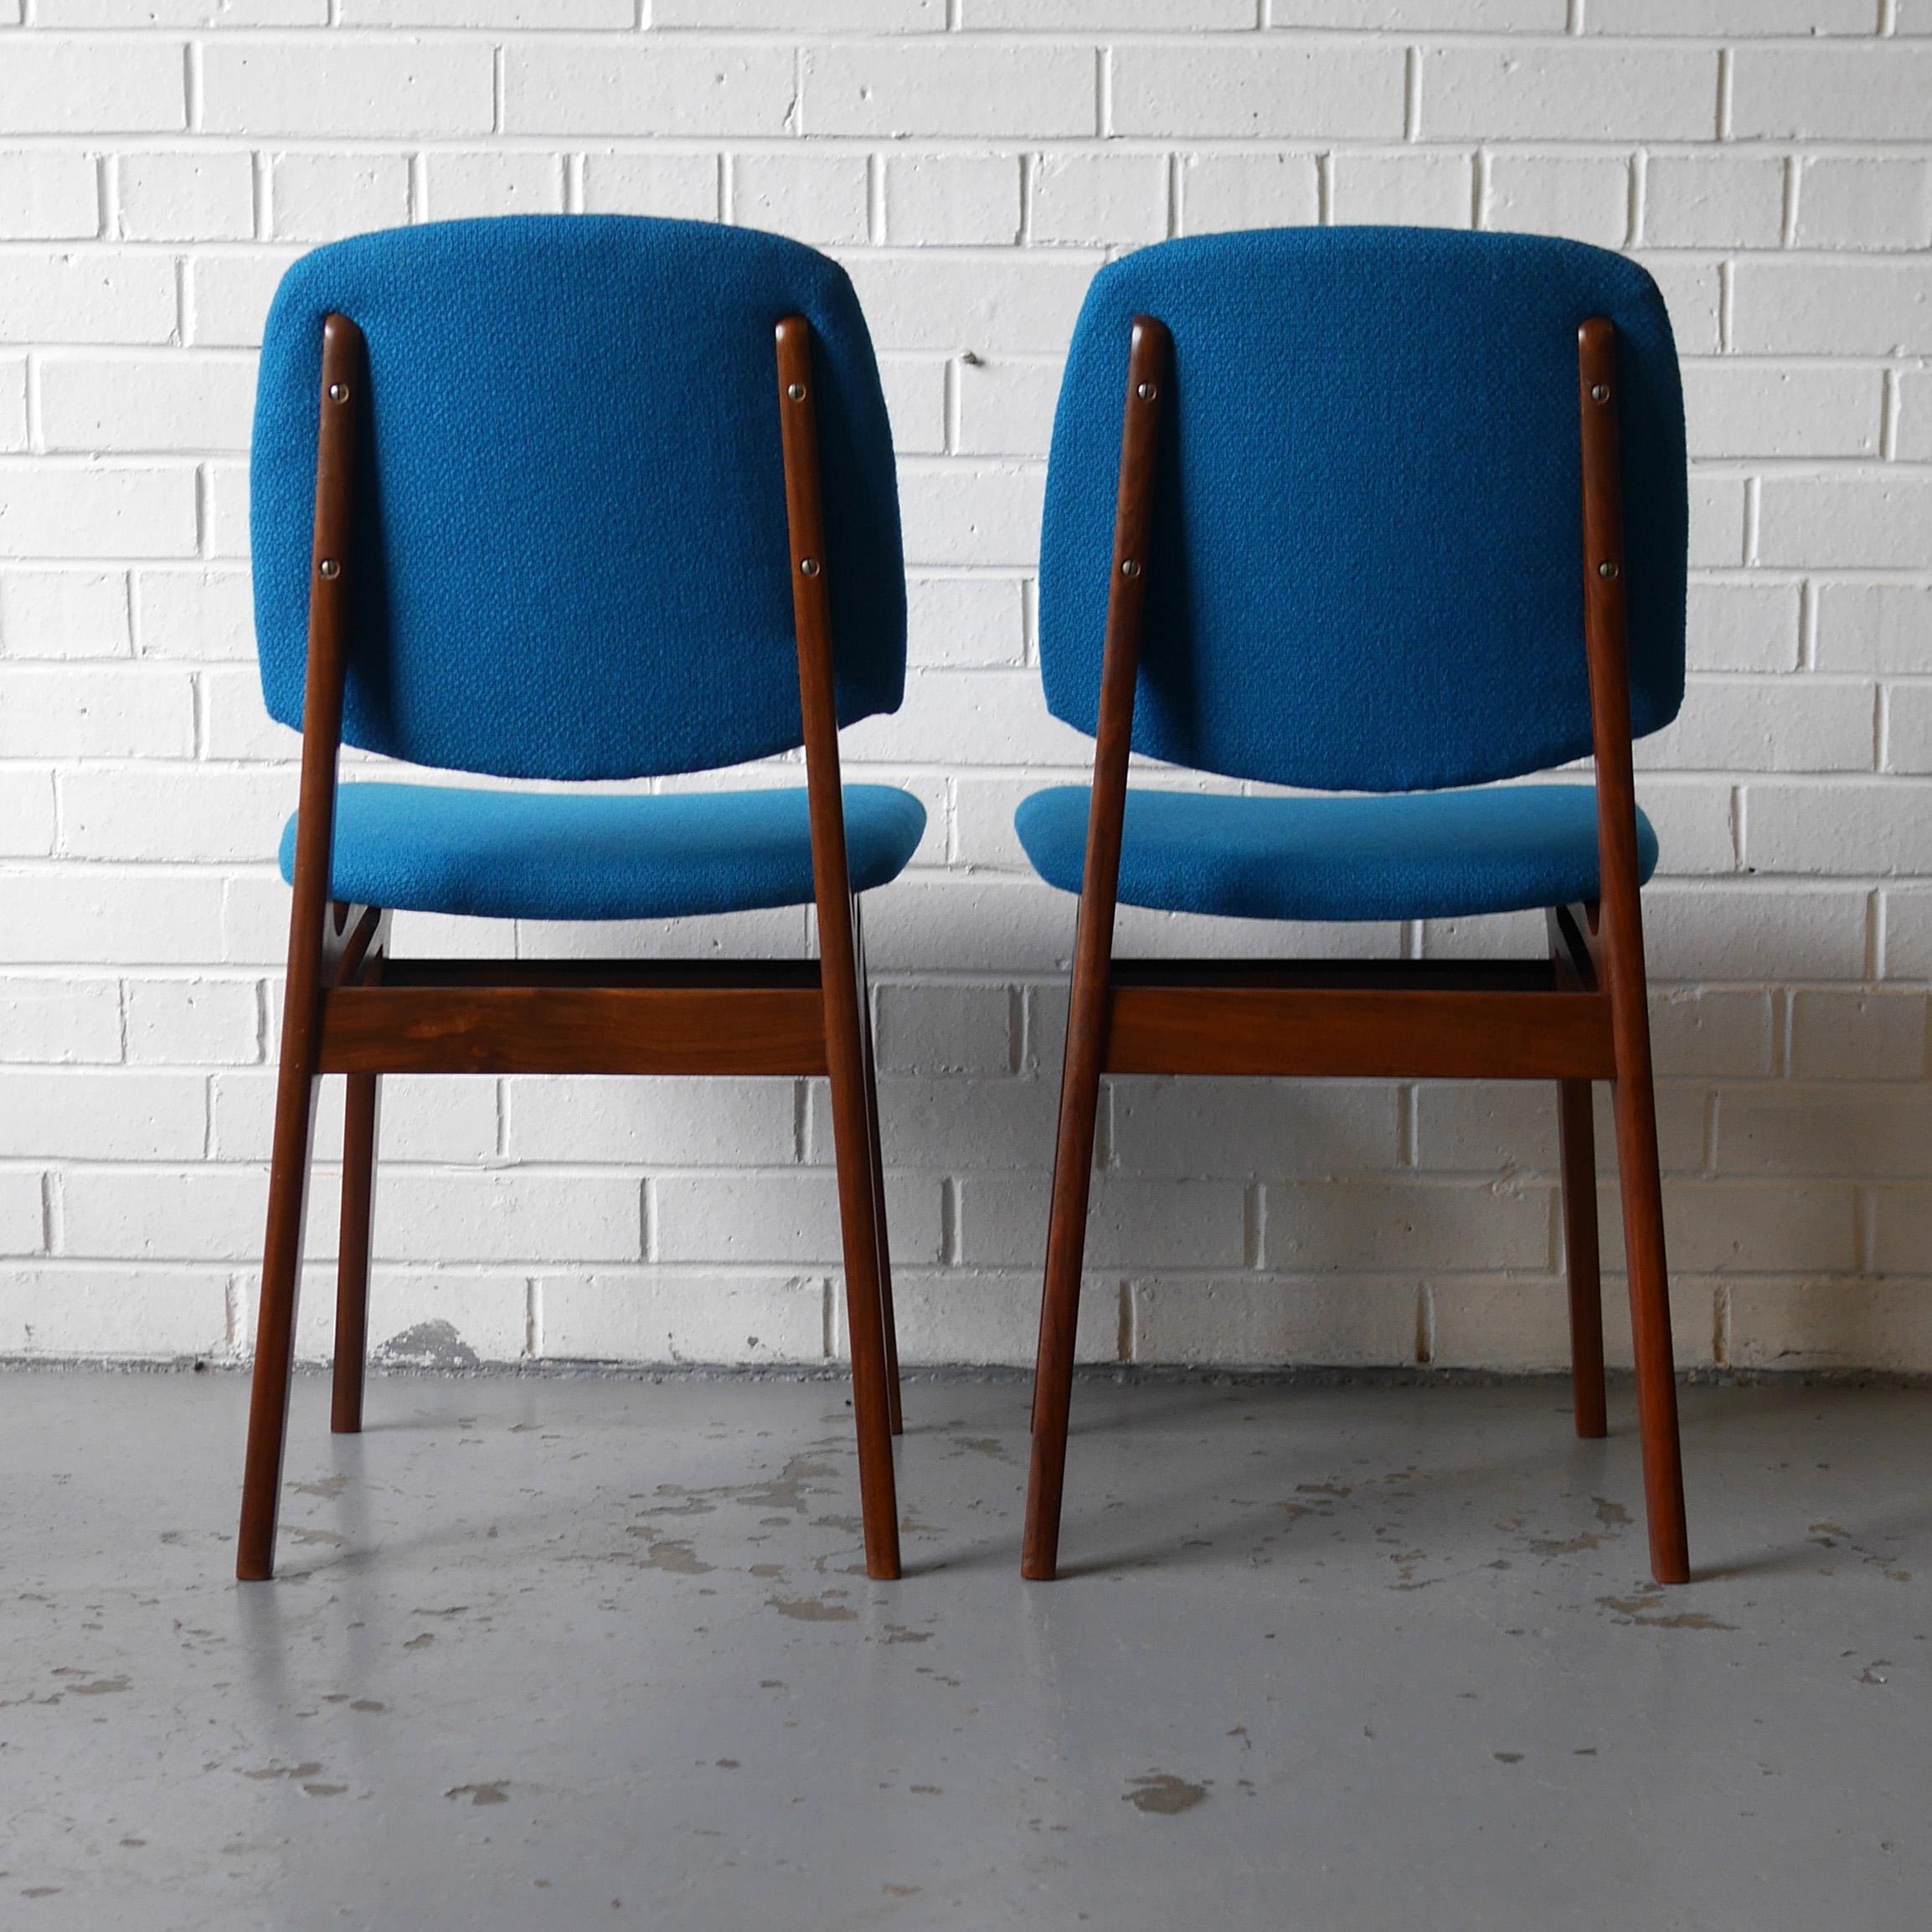 Mid-20th Century Set of Four Solid Afrormosia Dining Chairs with Blue Wool Upholstery, circa 1961 For Sale